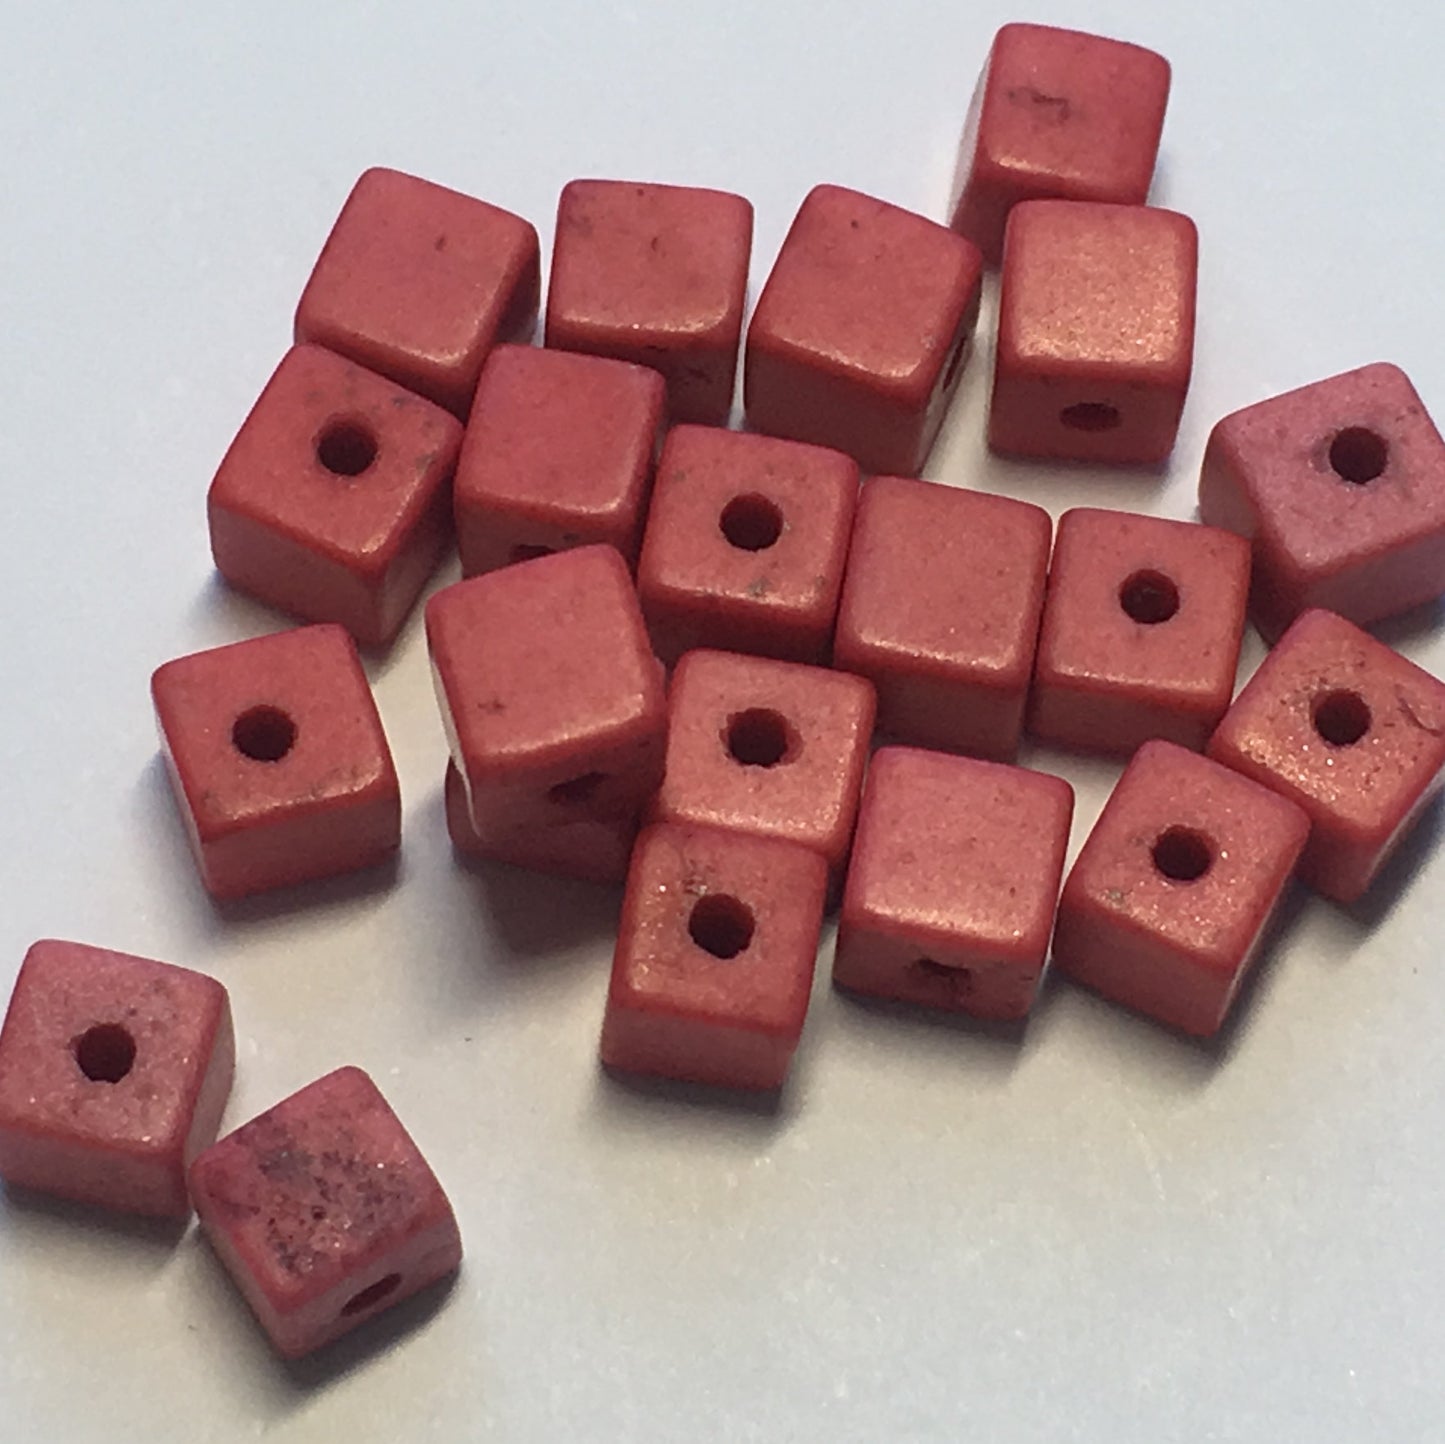 Pink Stone Cube / Square Beads, 4 mm, 23 Beads